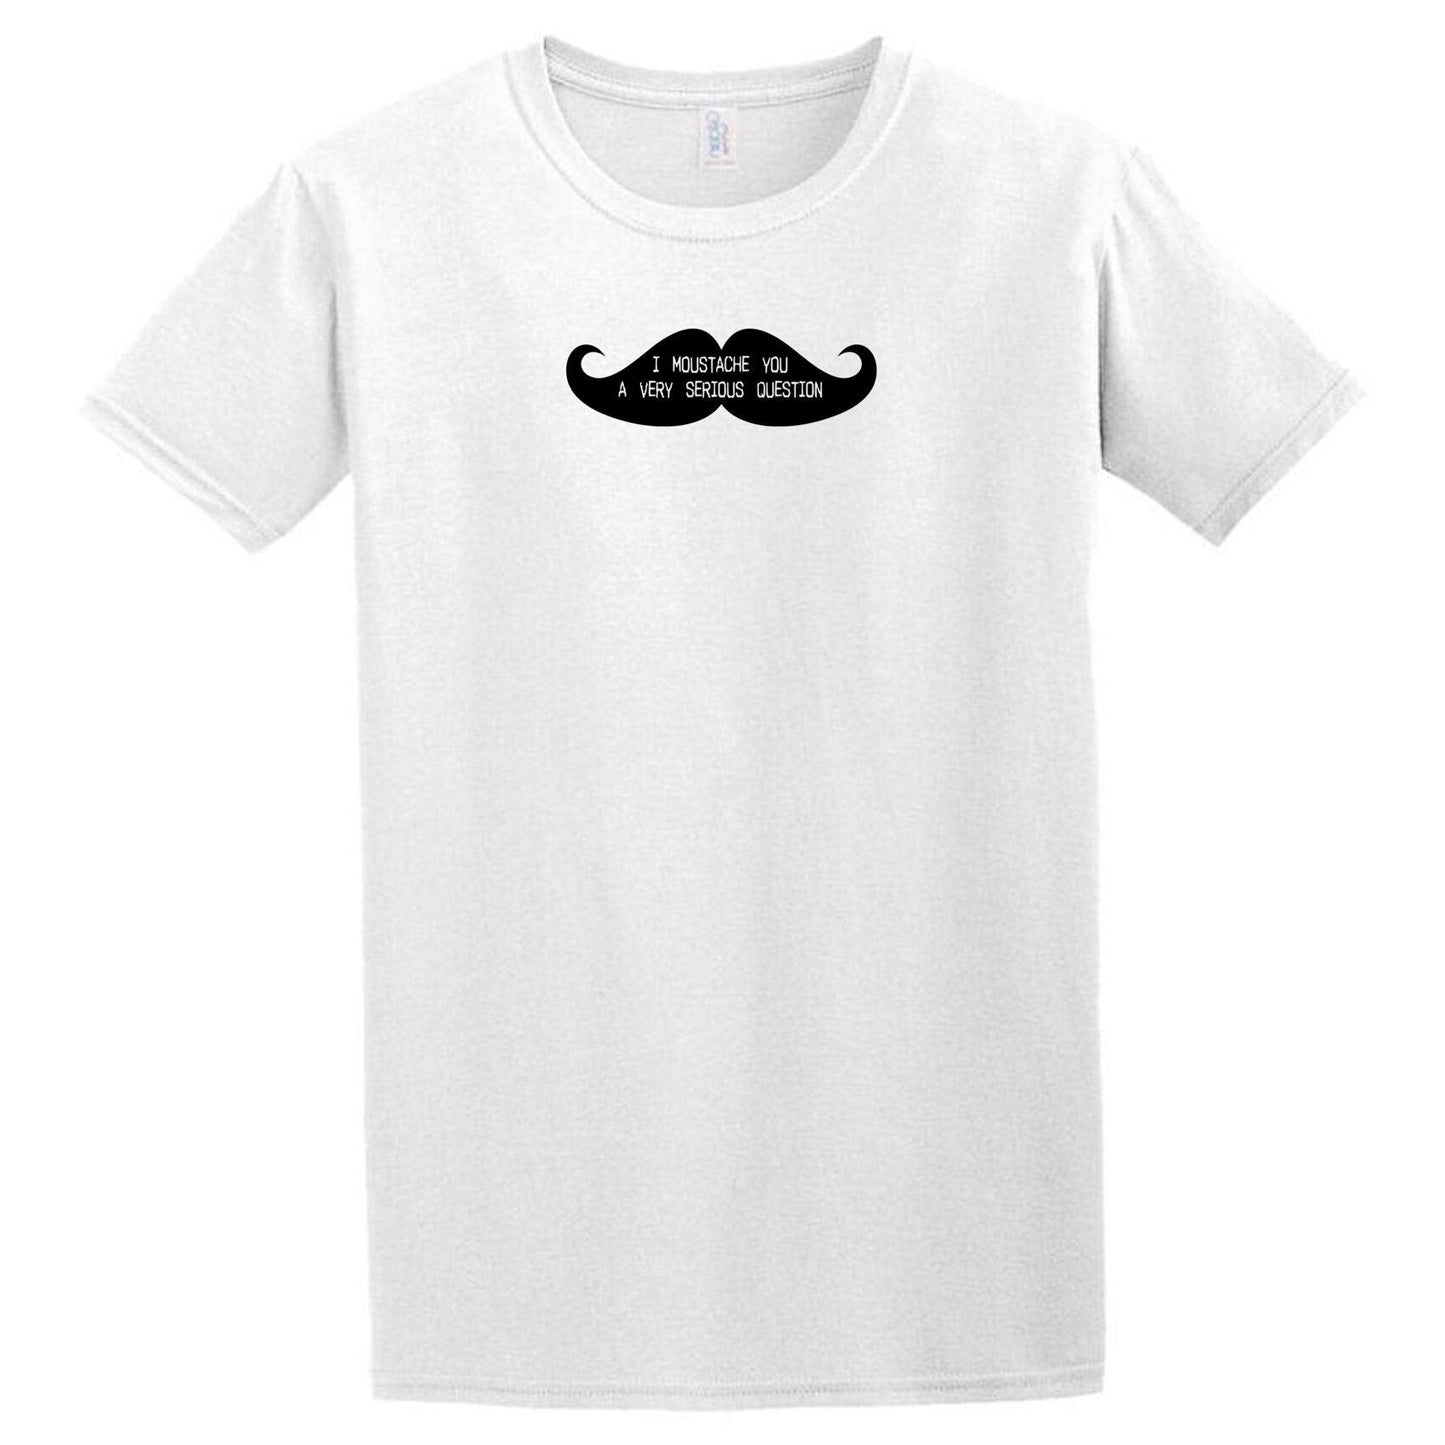 A Moustache T-Shirt from Twisted Gifts with a mustache on it.